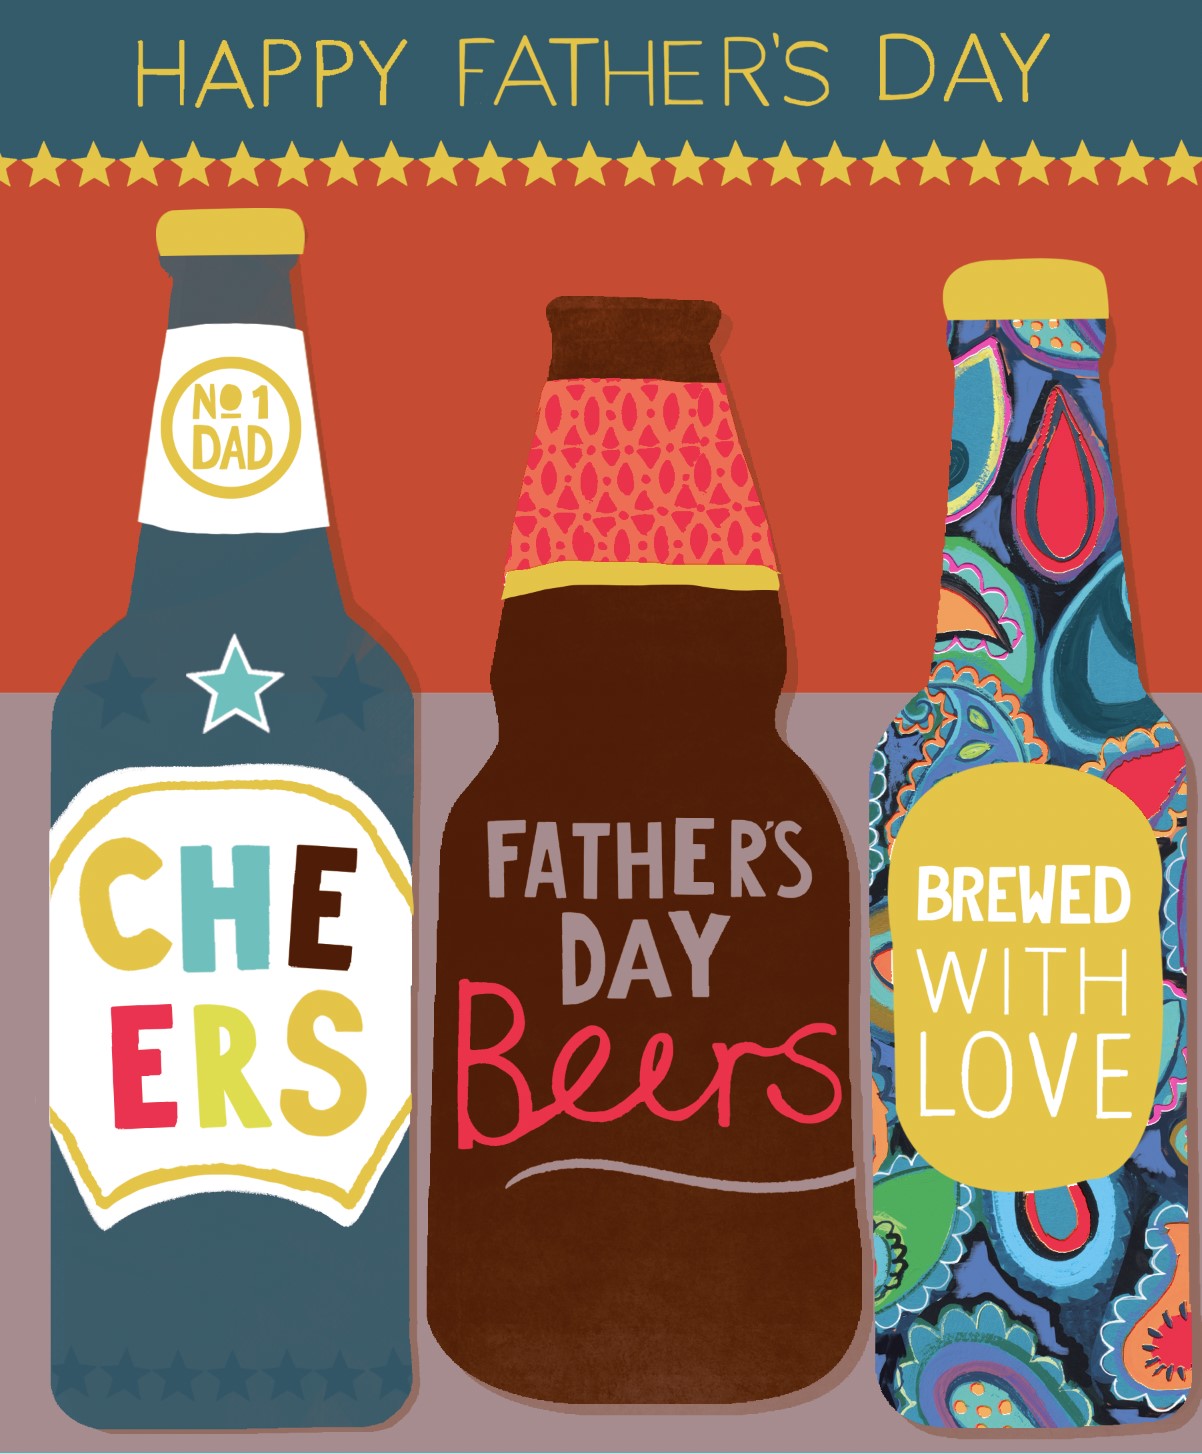 Brewed With Love Beer Bottles Father's Day Card by penny black